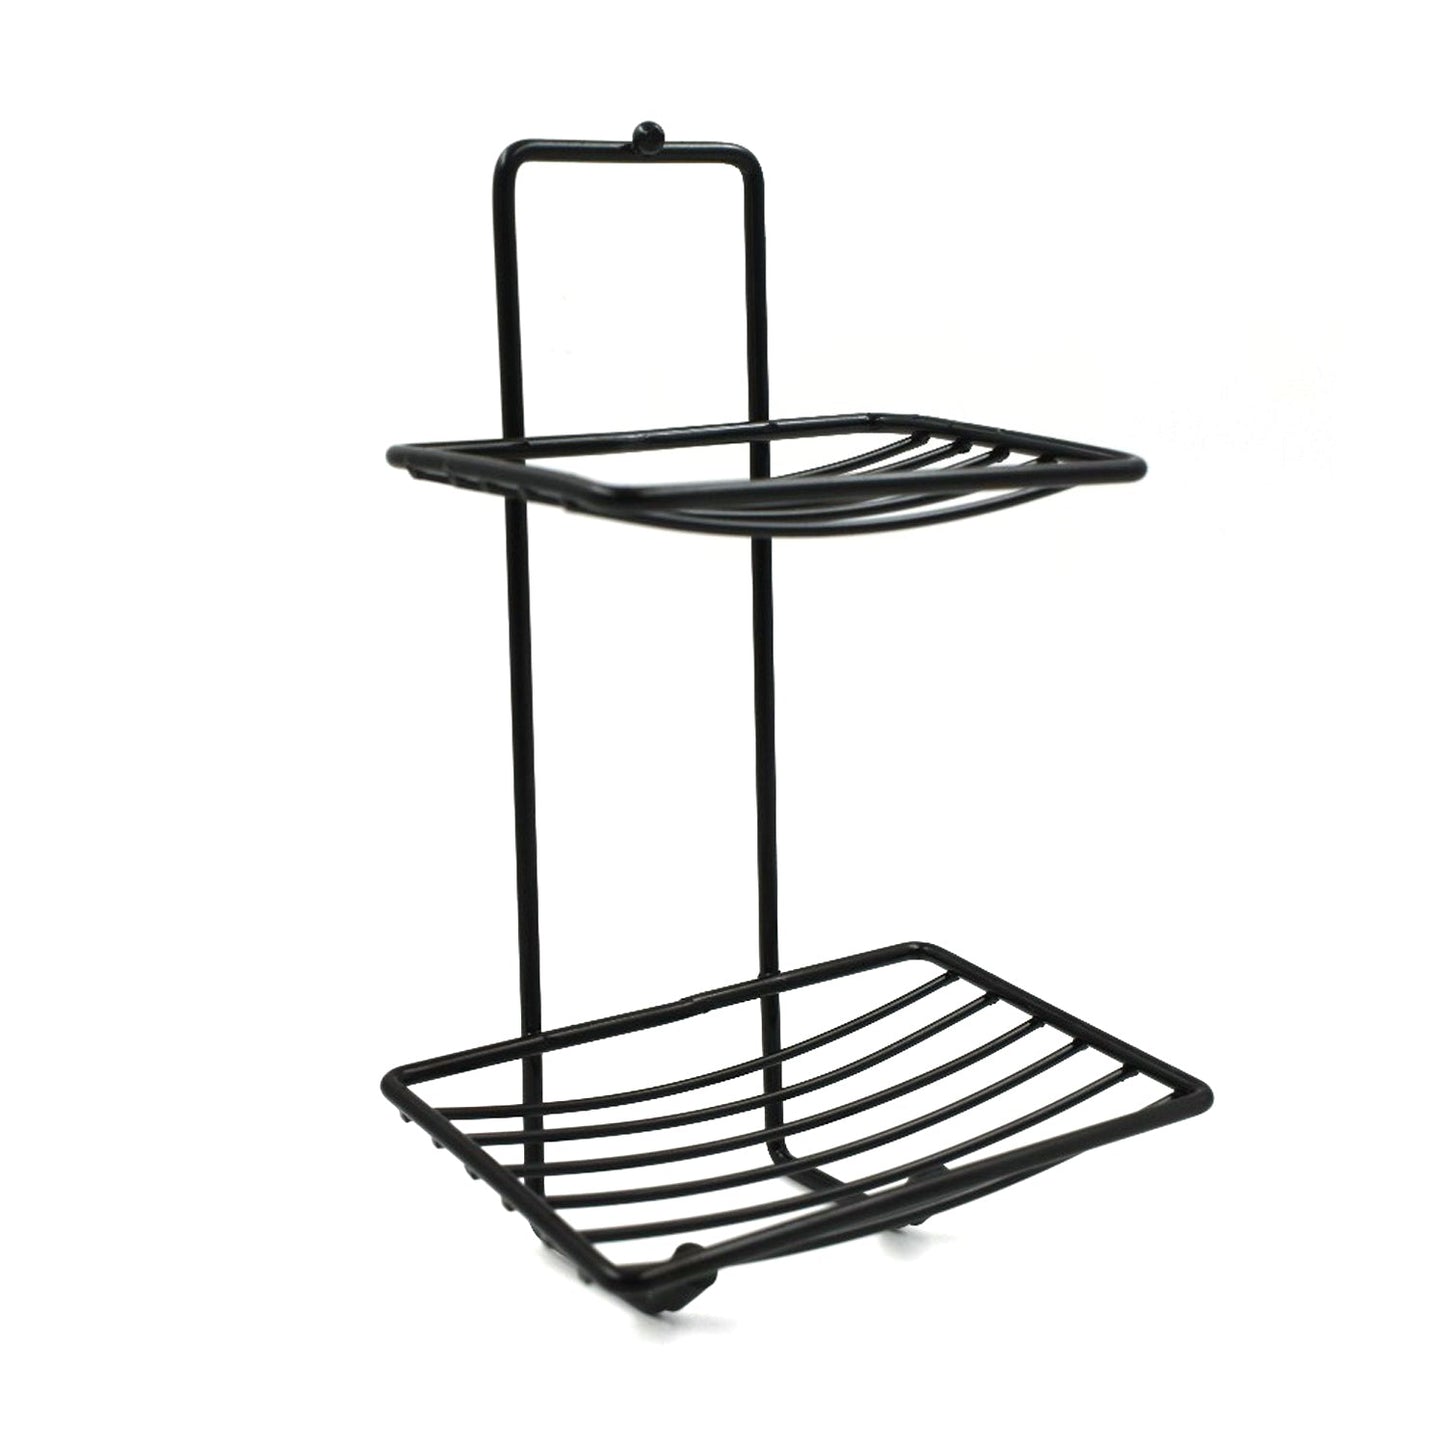 1763A 2 Layer SS Soap Rack used in all kinds of places household and bathroom purposes for holding soaps.